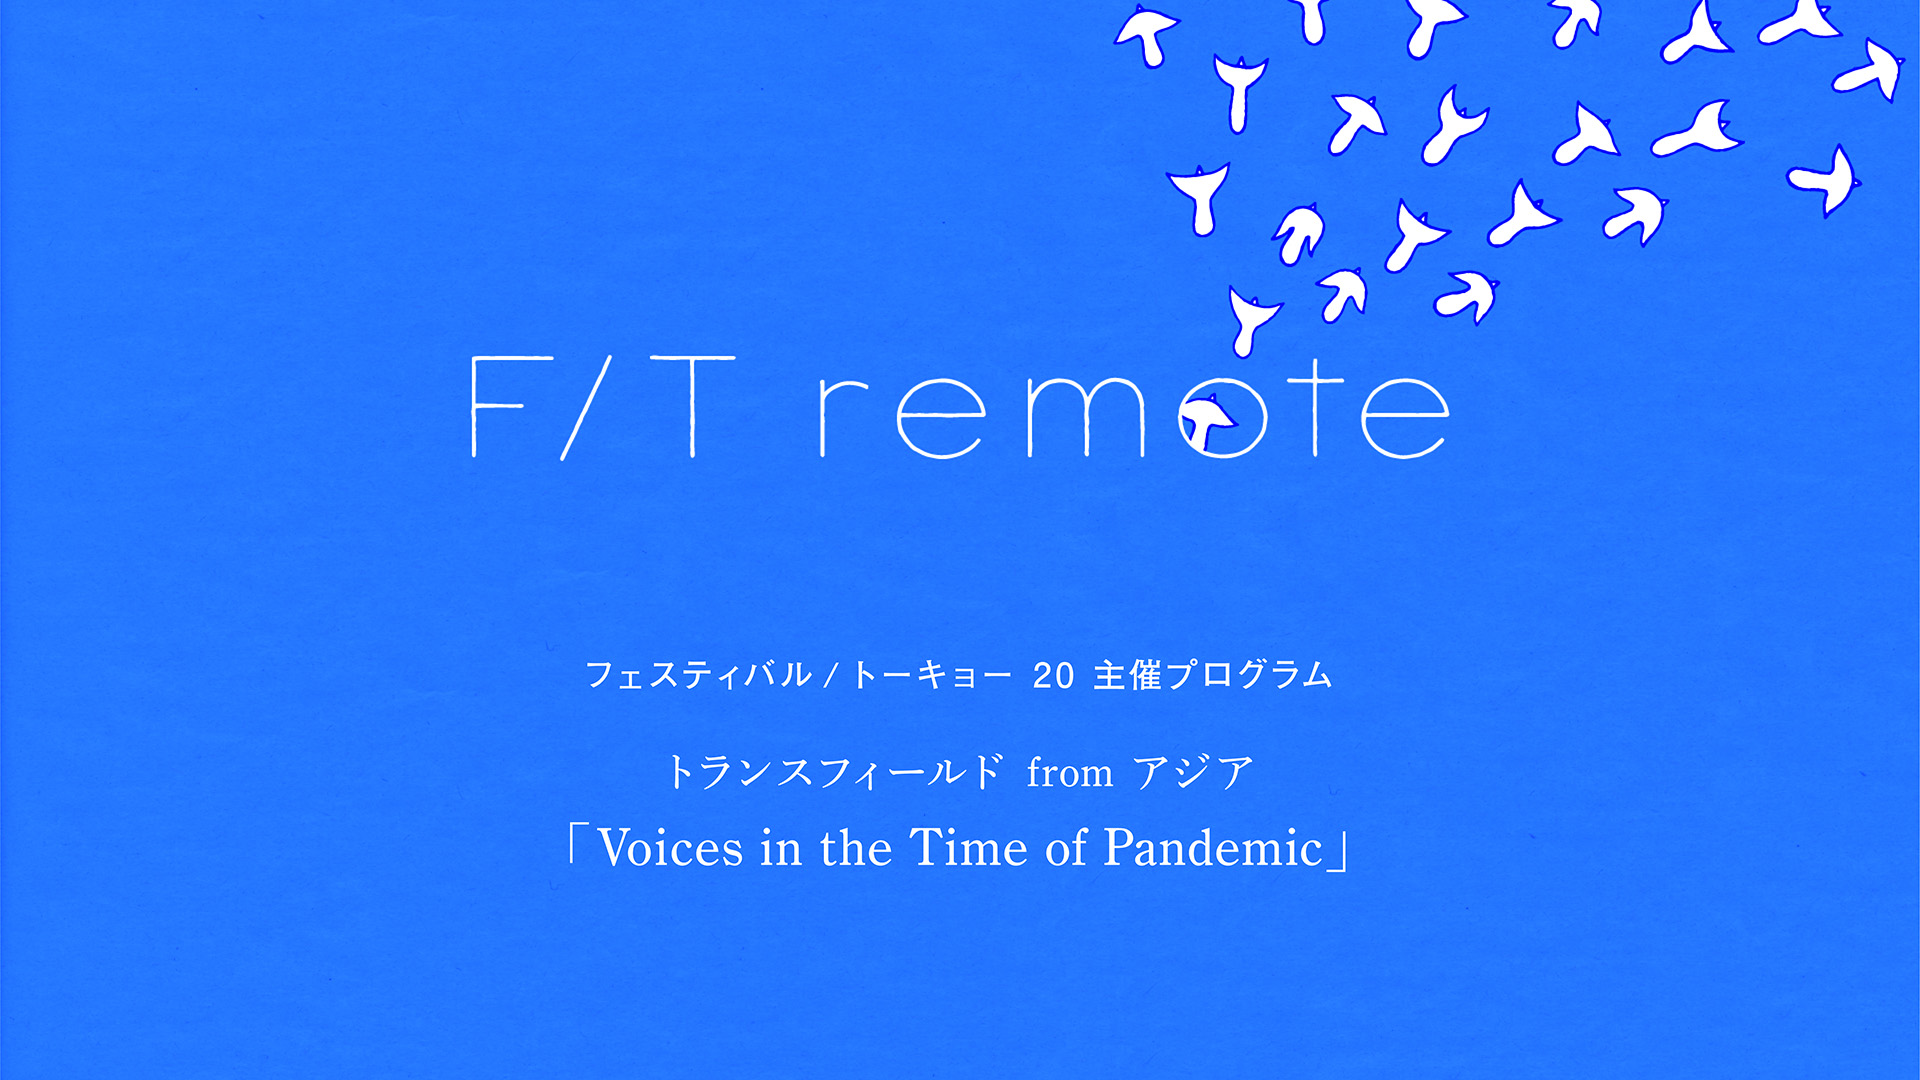 Voices in the Time of Pandemic